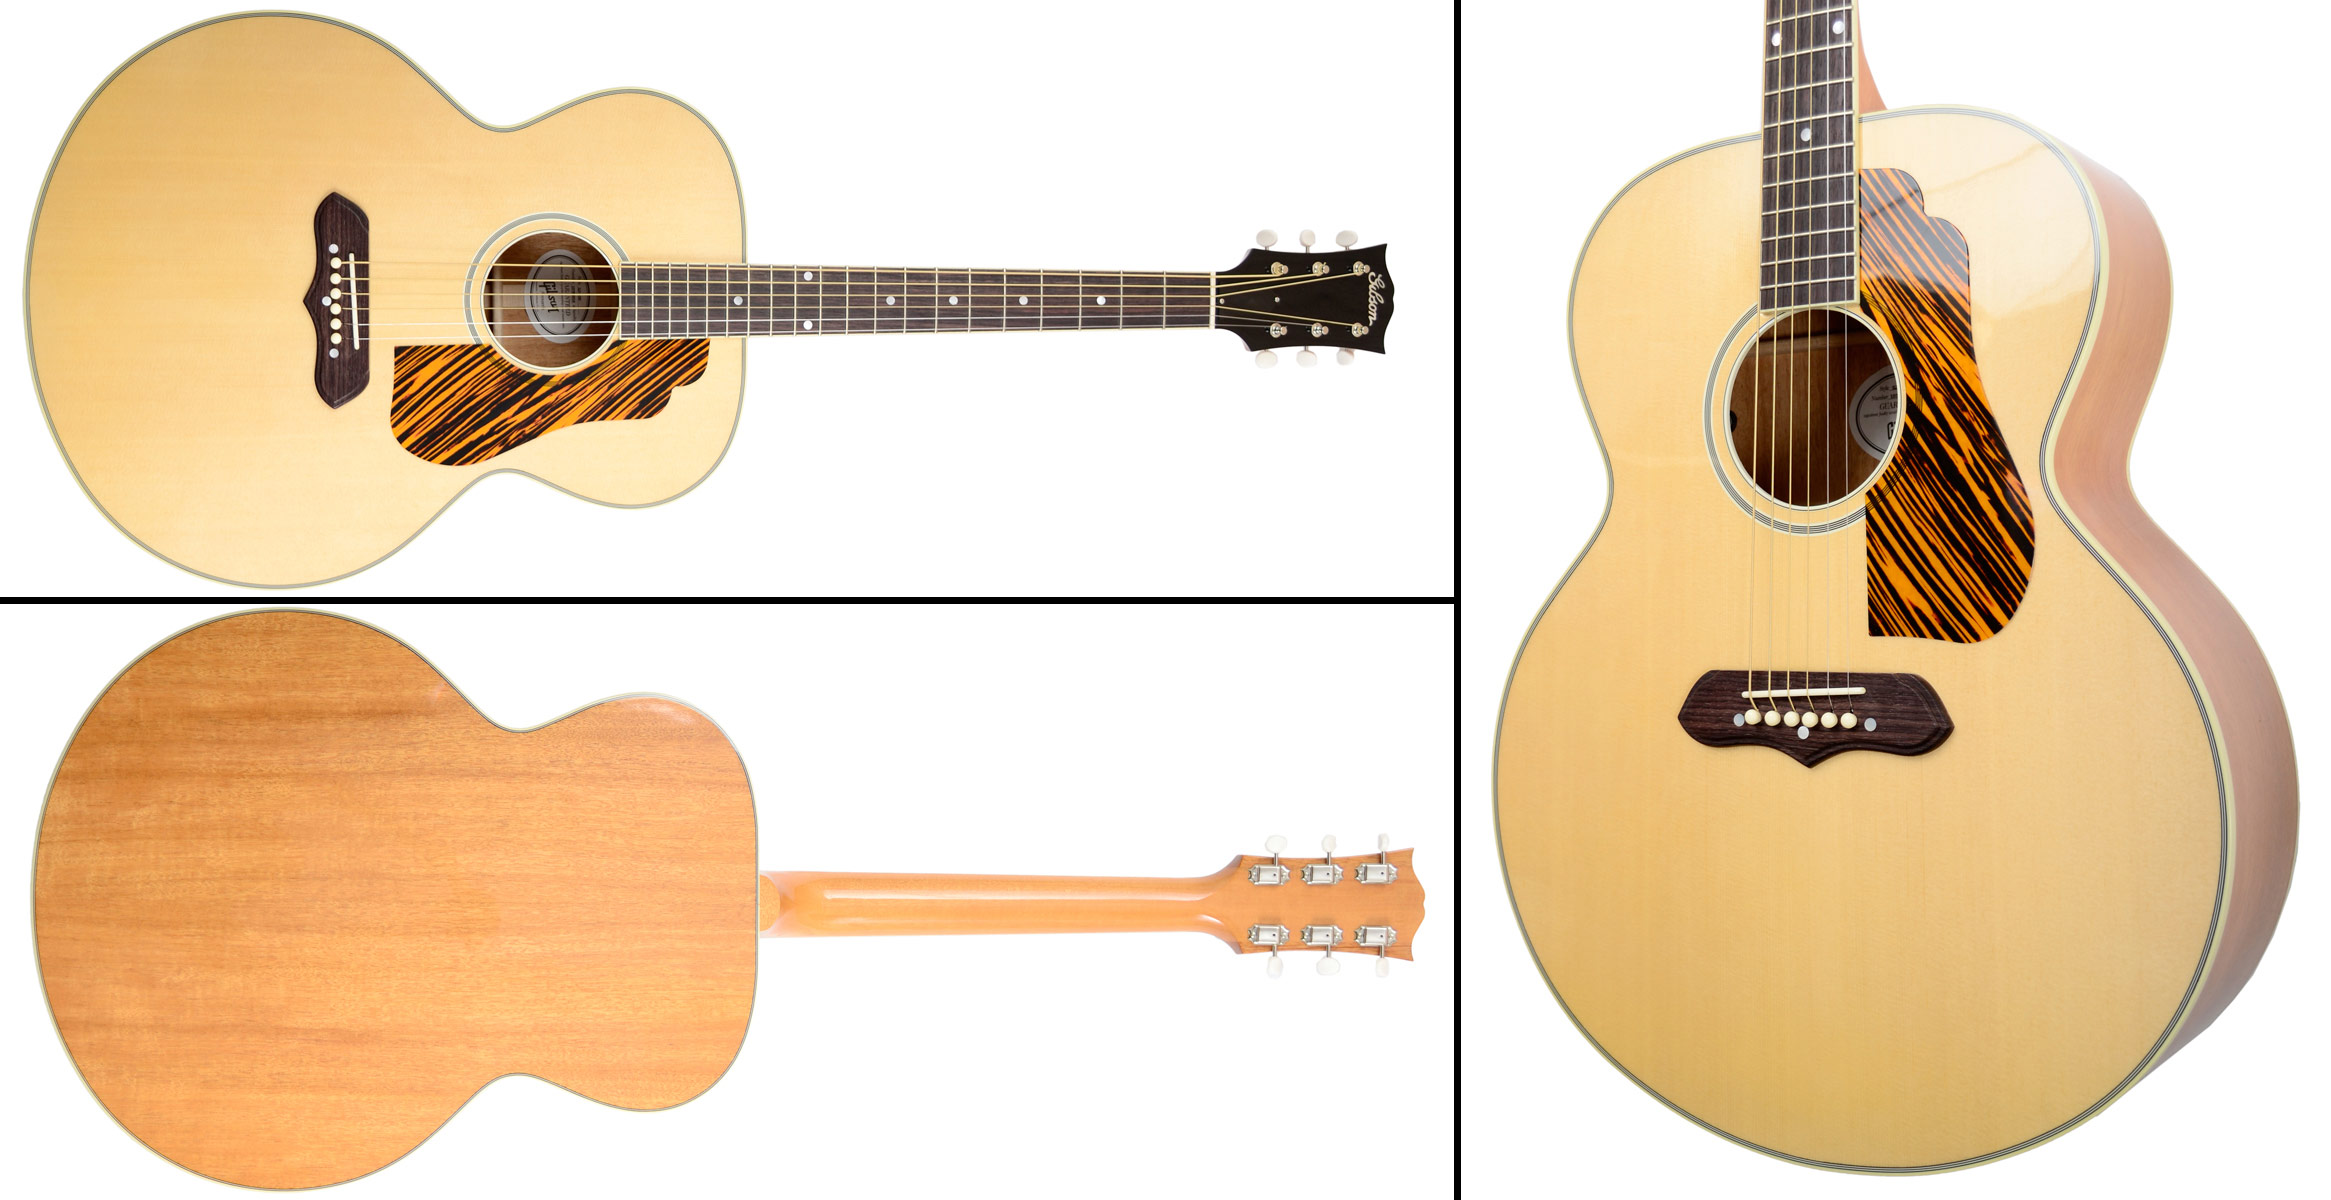 Gibson Sj100 1941 2013 Ch - Antique Natural - Westerngitarre & electro - Variation 2